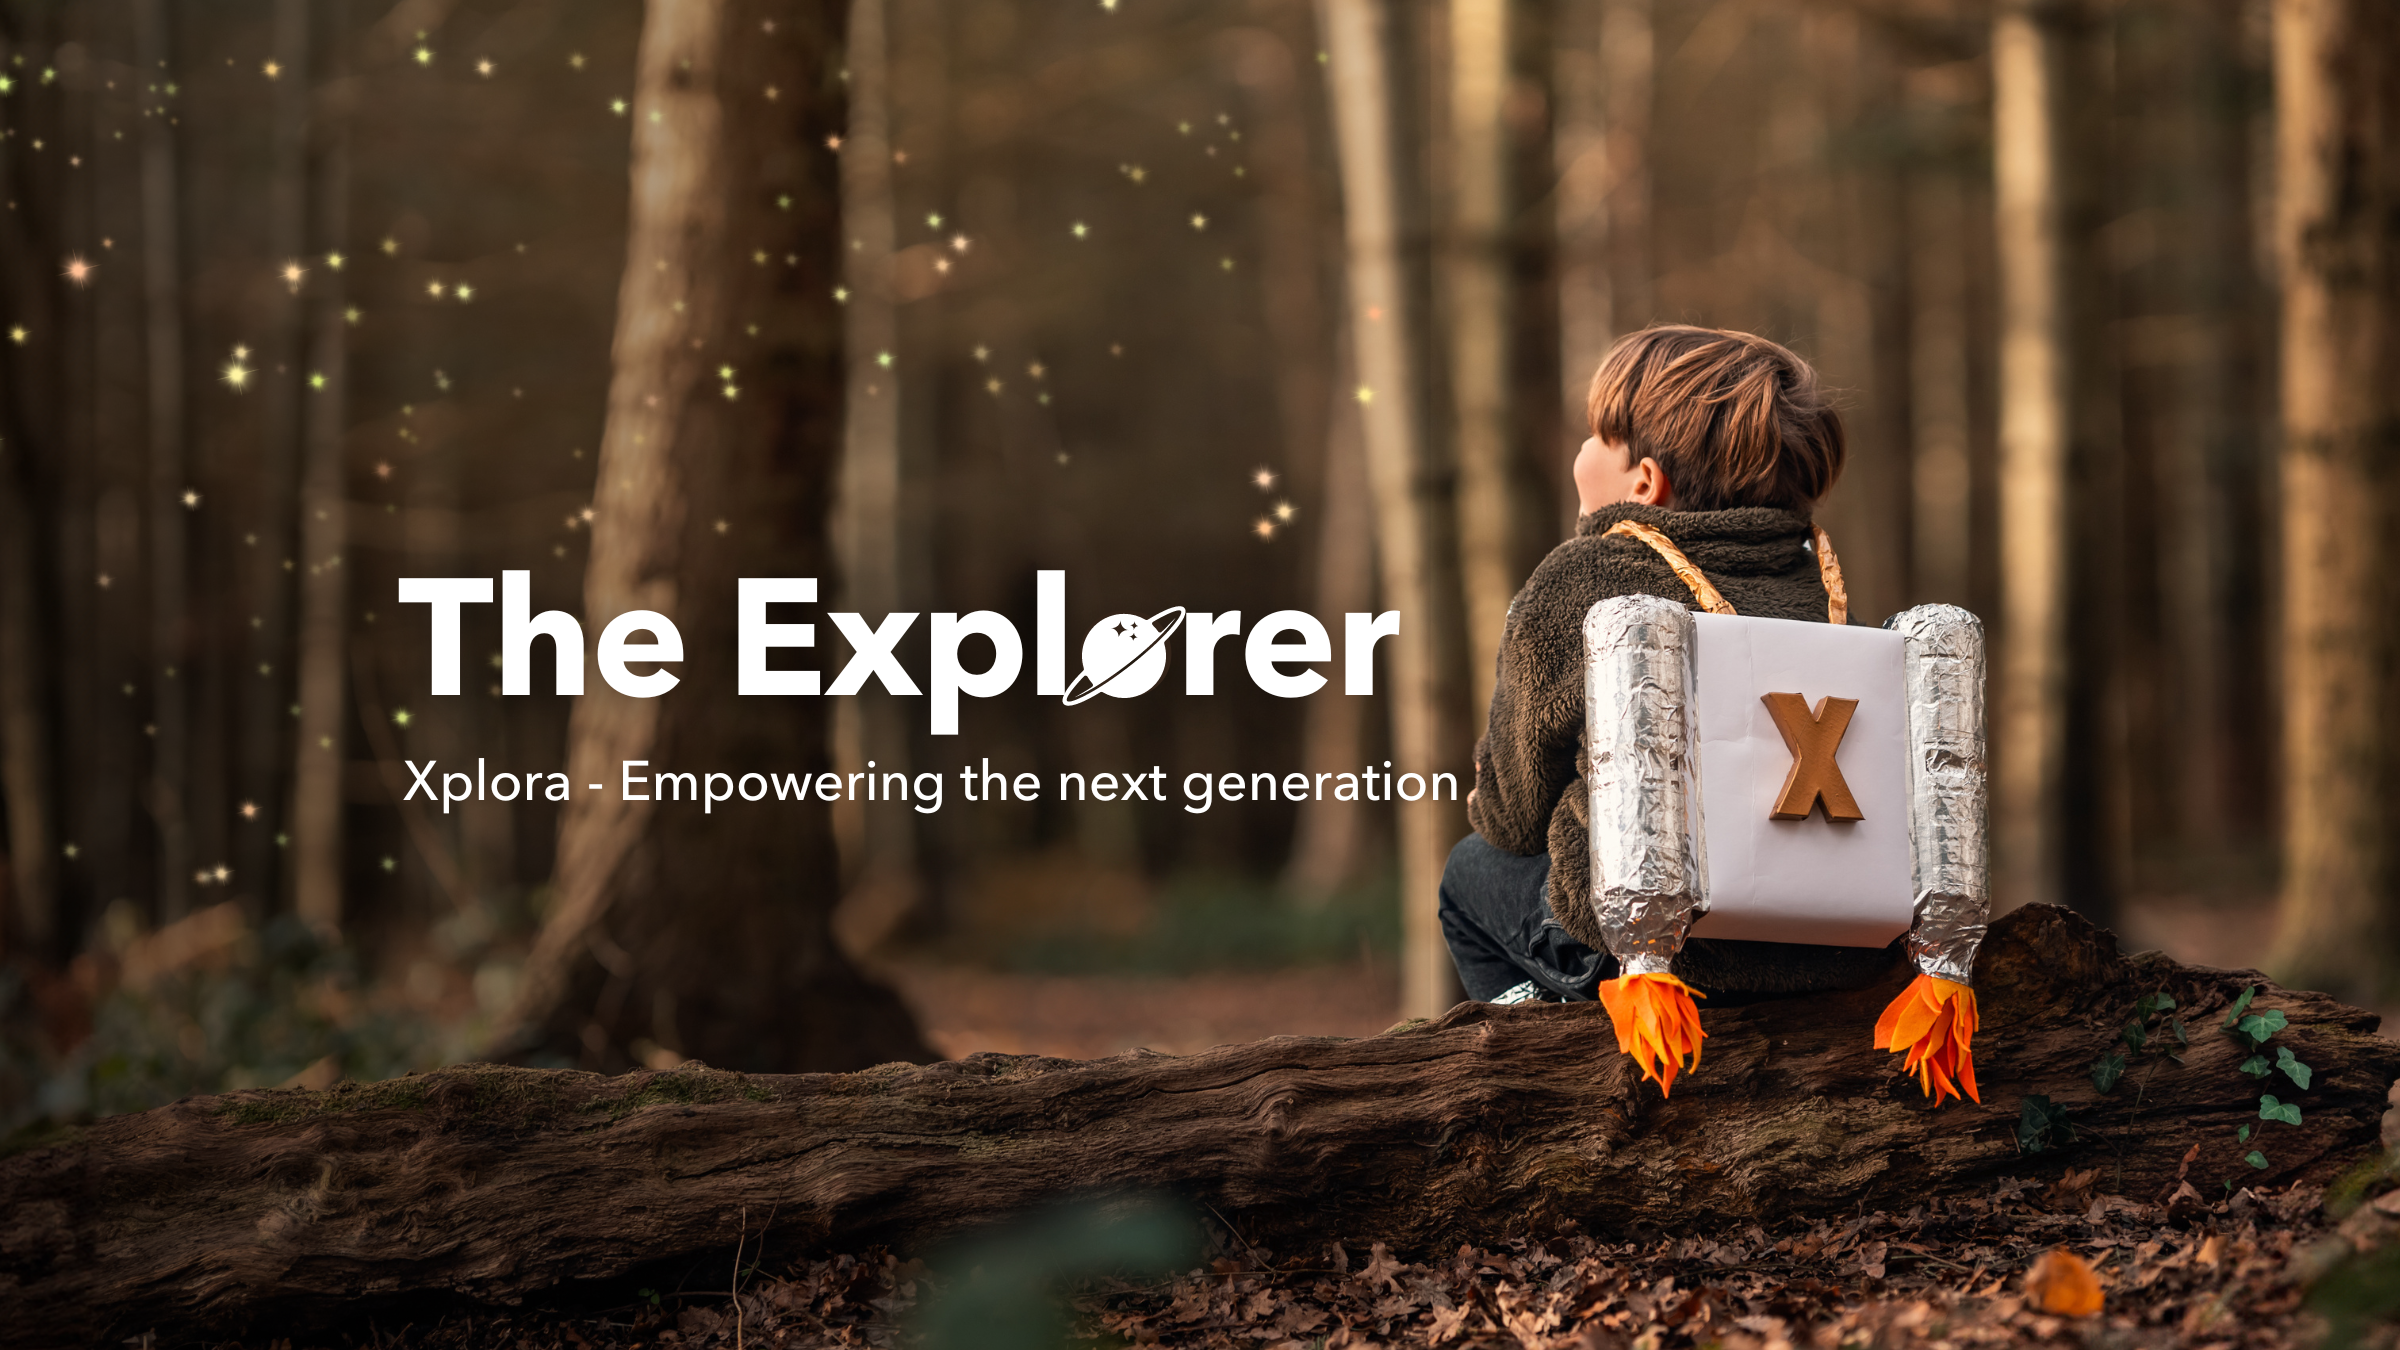 The Explorer – Empowering the next generation